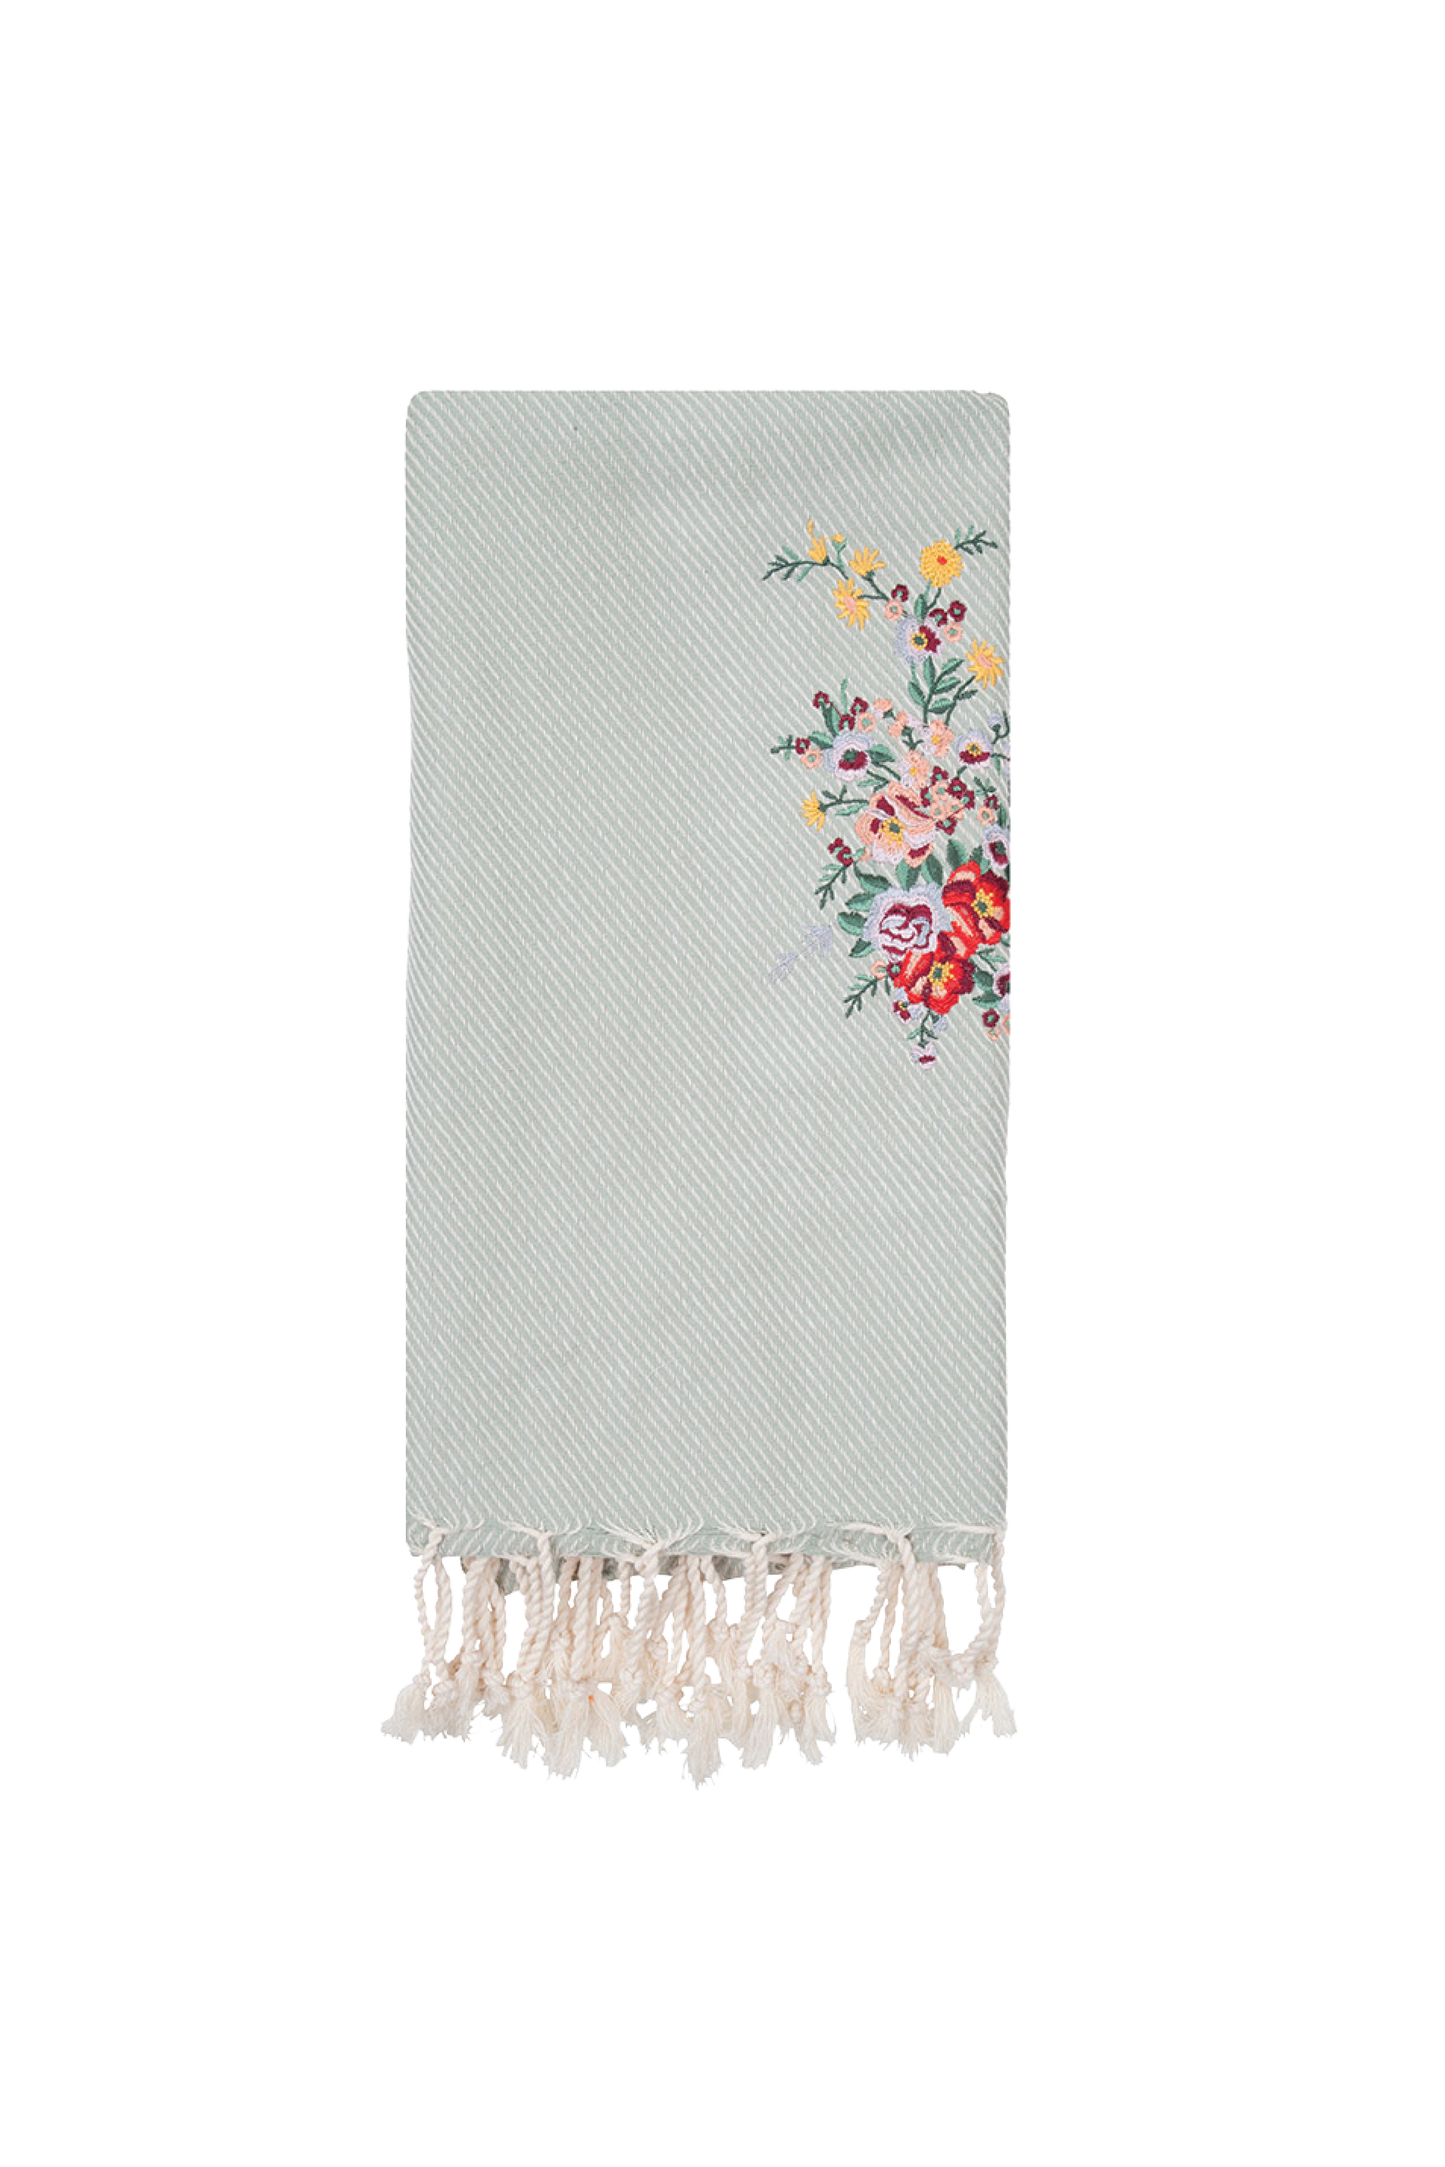 Hammam 34 EMBROIDERED HAMMAM TOWEL WITH THE FLOWER IN SEA GREEN